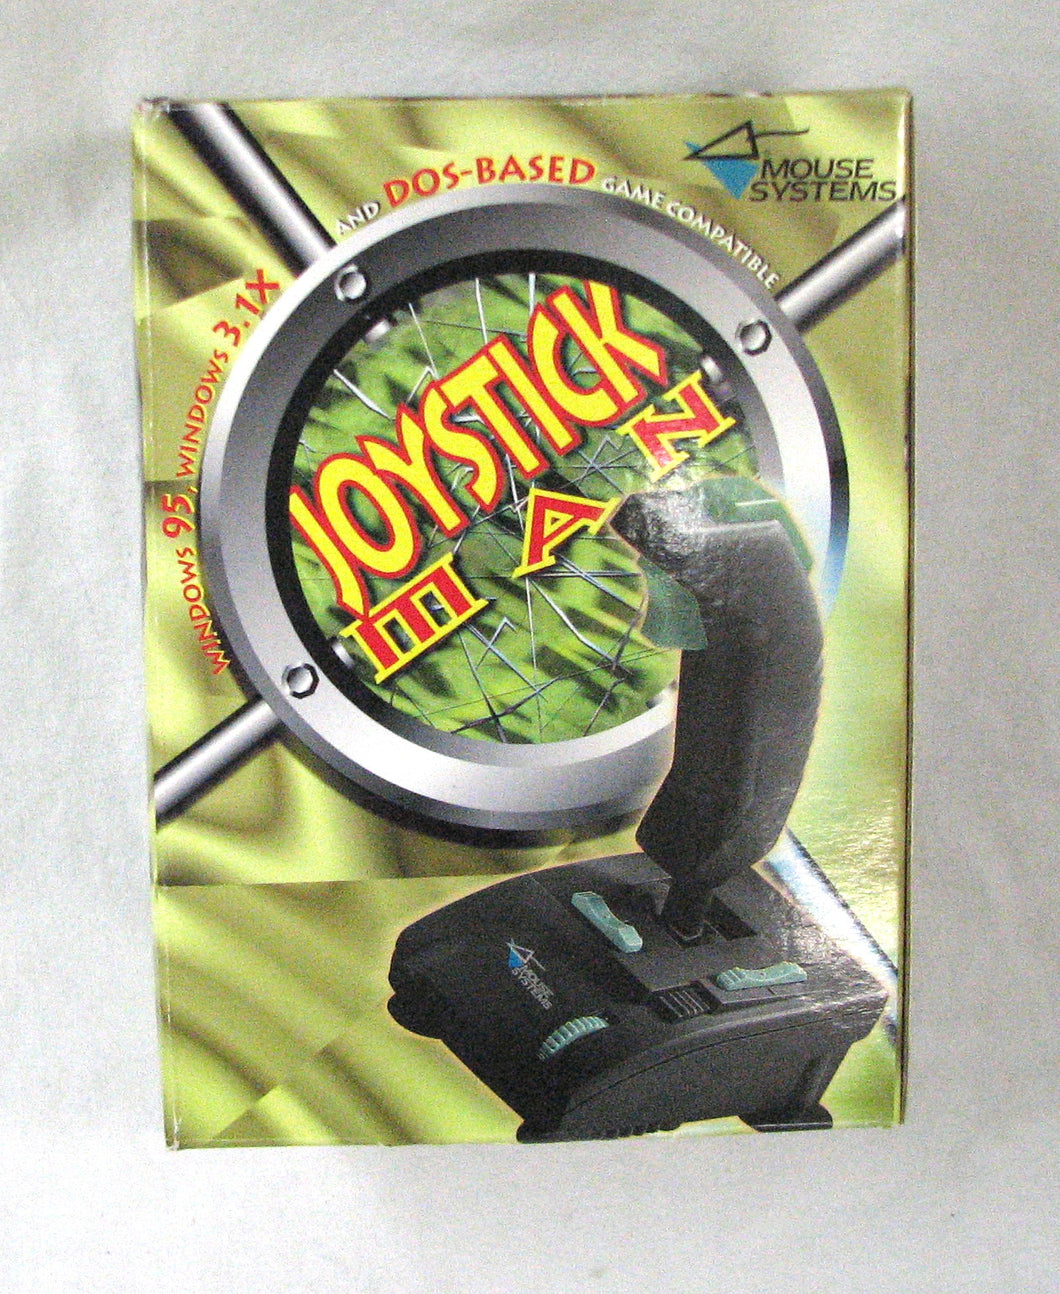 Mouse Systems 3 button X/Y/T analog joystick - Gameport